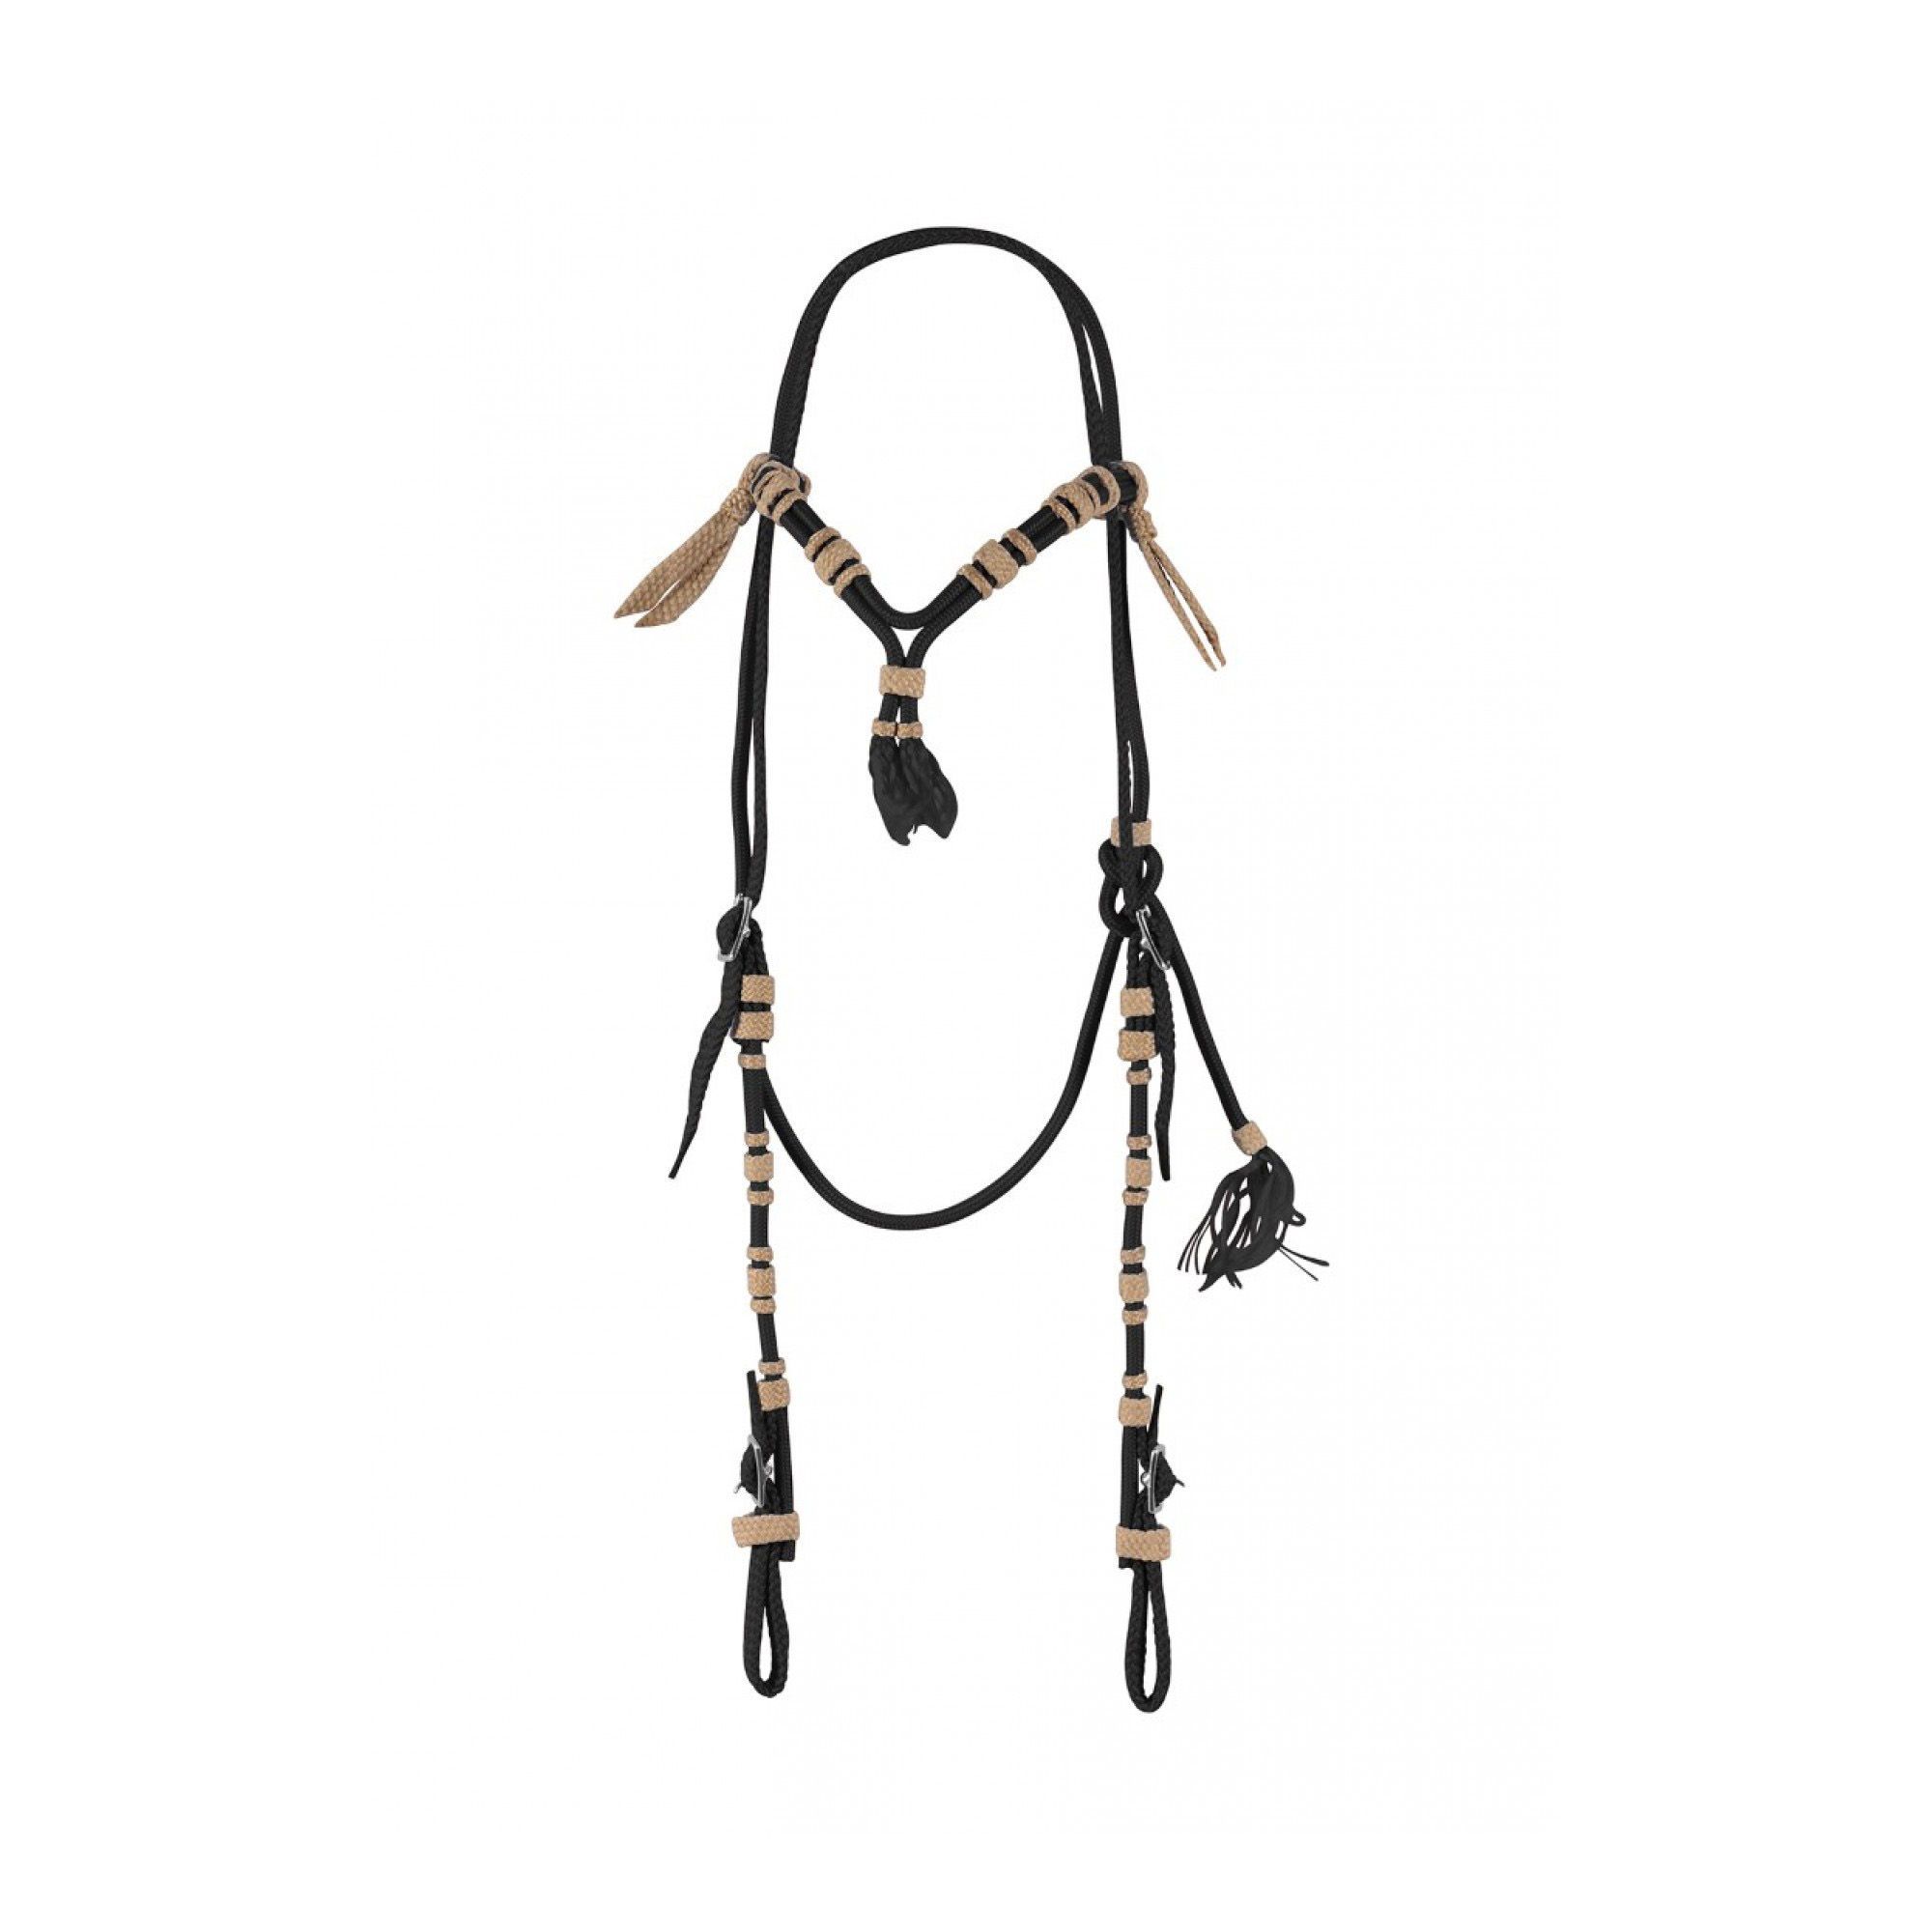 Braided nylon bridle Vaquero from WESTERN RAWHIDE & HARNESS | BMR